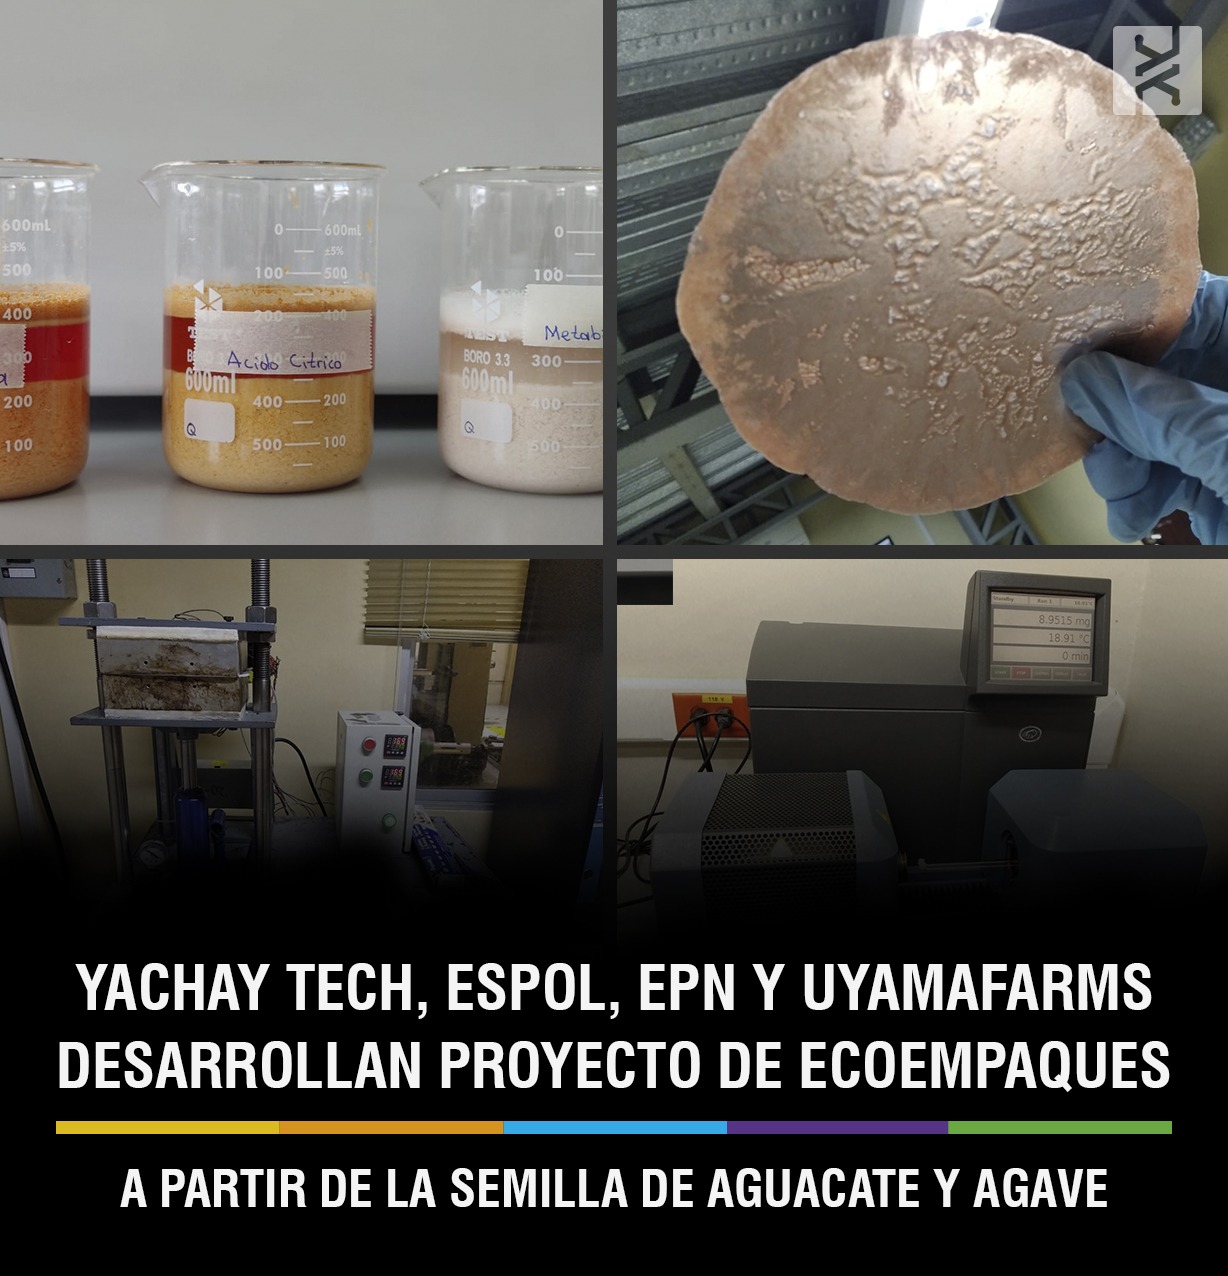 MULTIDISCIPLINARY TEAM AND YACHAY TECH DEVELOP ECO-PACKAGING PROJECT